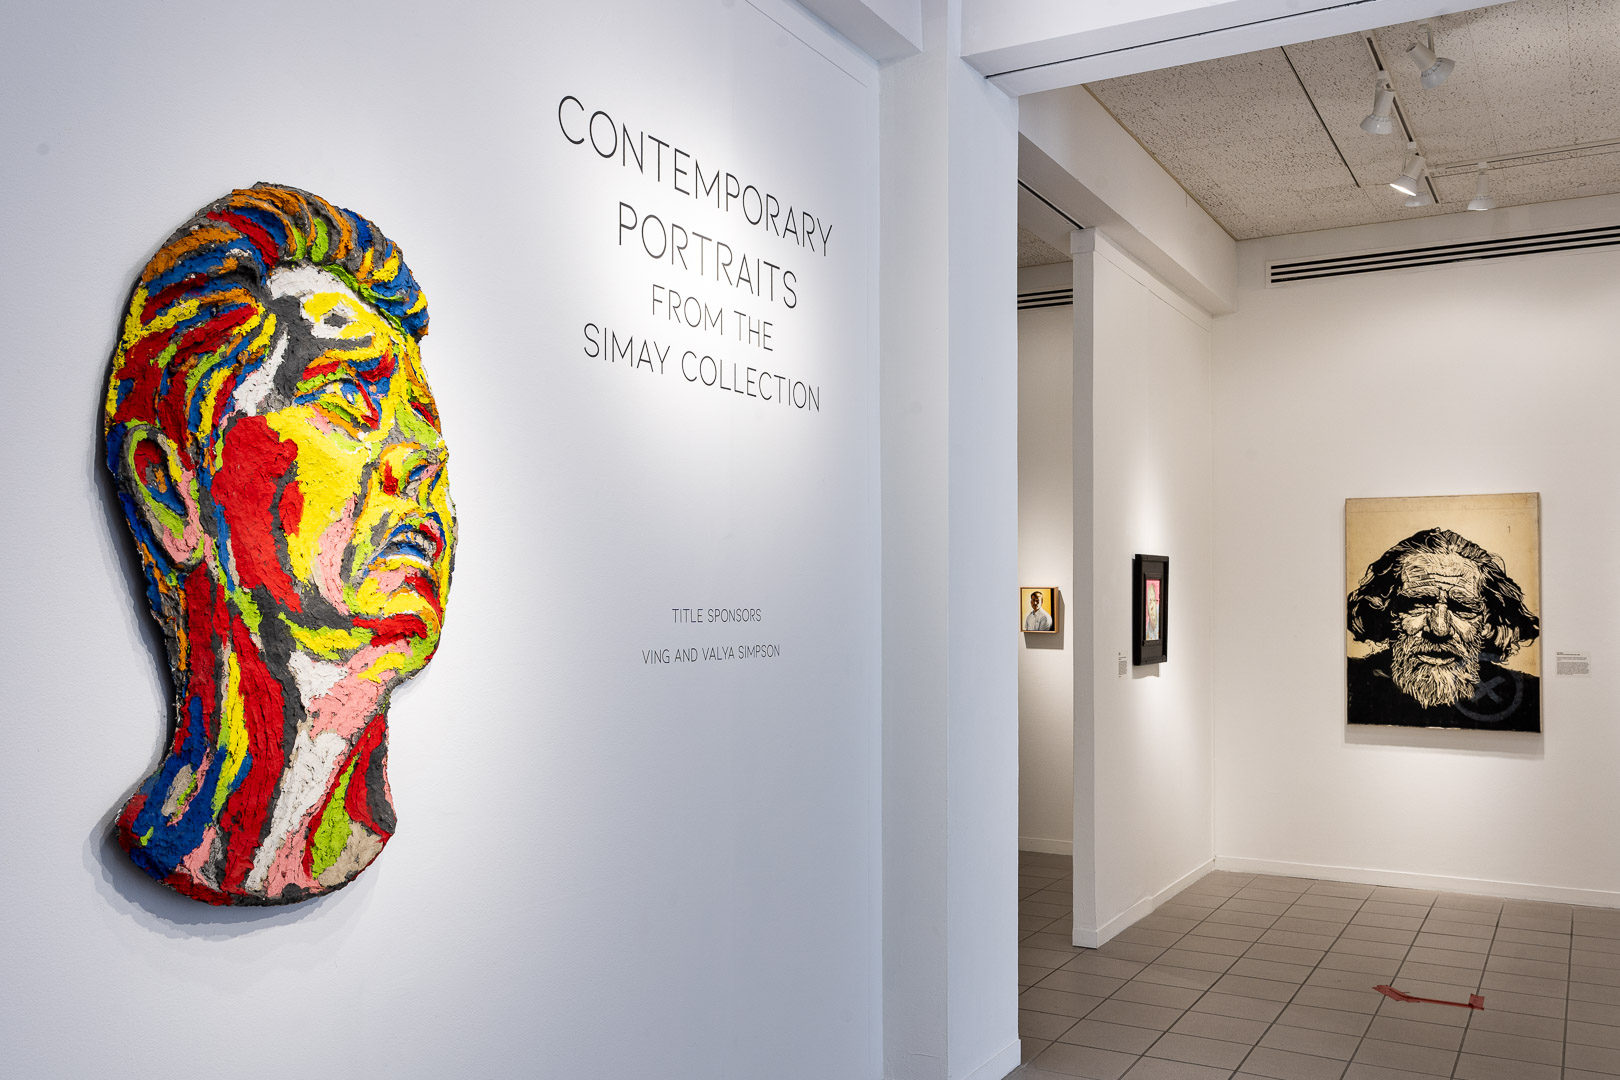 Contemporary Portraits from the Simay Collection installed at OMA